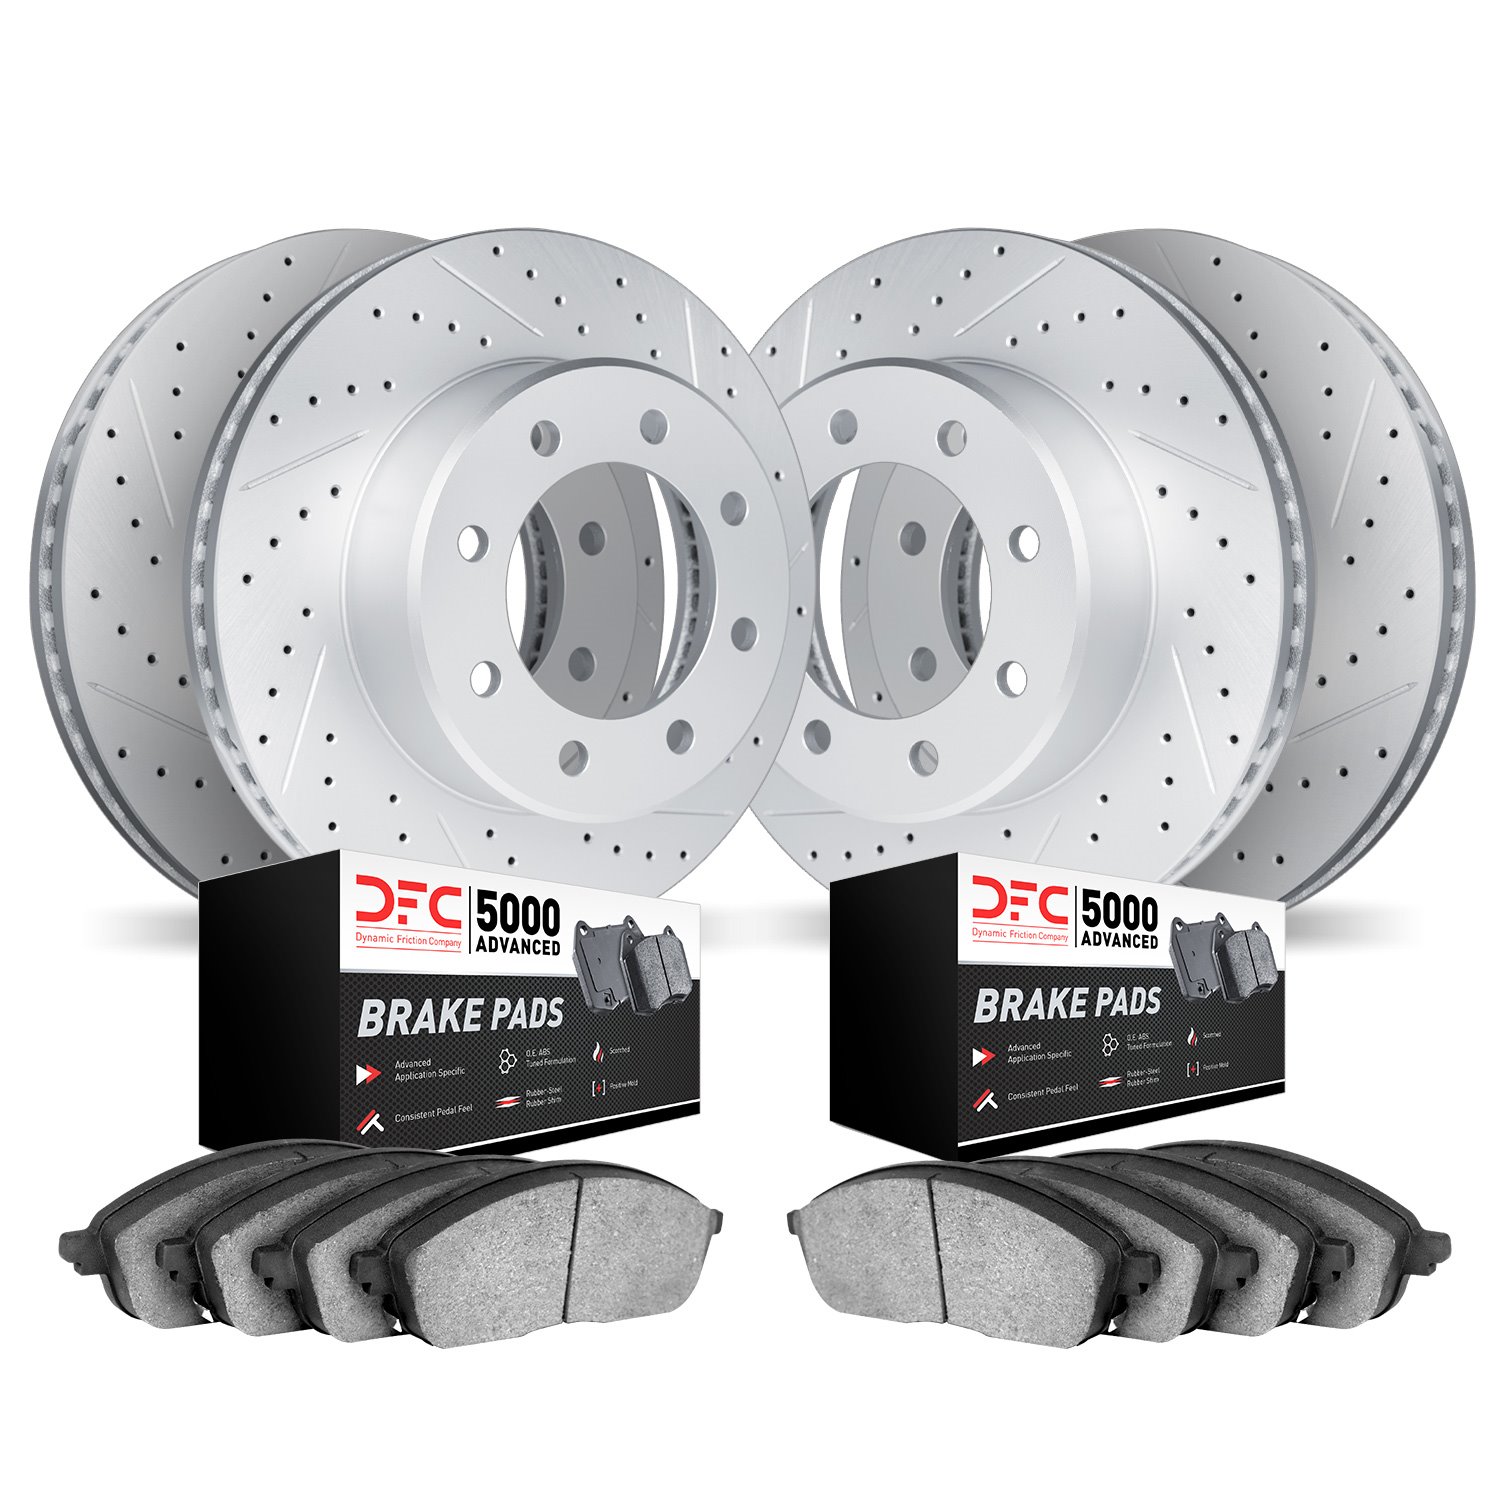 2504-54276 Geoperformance Drilled/Slotted Rotors w/5000 Advanced Brake Pads Kit, 2006-2010 Ford/Lincoln/Mercury/Mazda, Position: